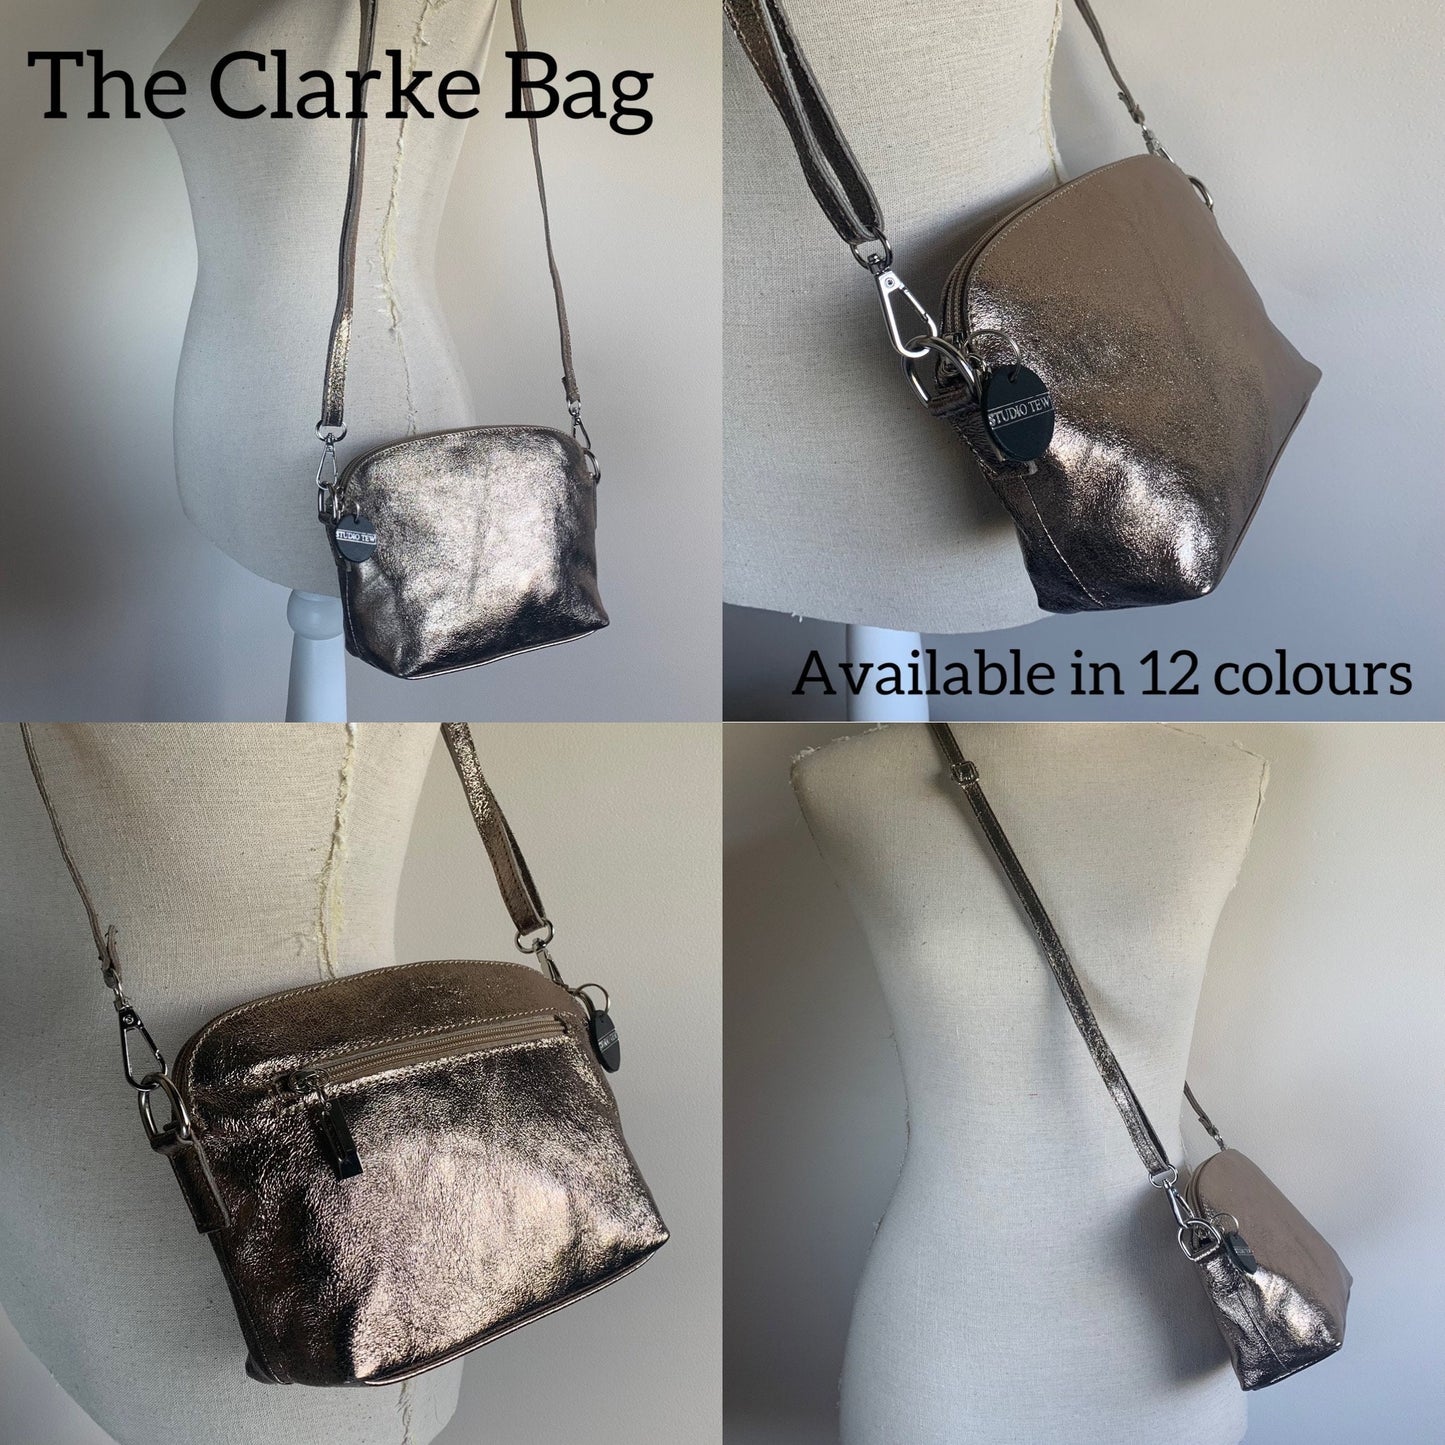 Metallic Leather Crossbody Bag With Strap & Silver Hardware, Gold Simple Bag, Silver Bridesmaid Bag, Leather Handbag, 3rd Anniversary Gift